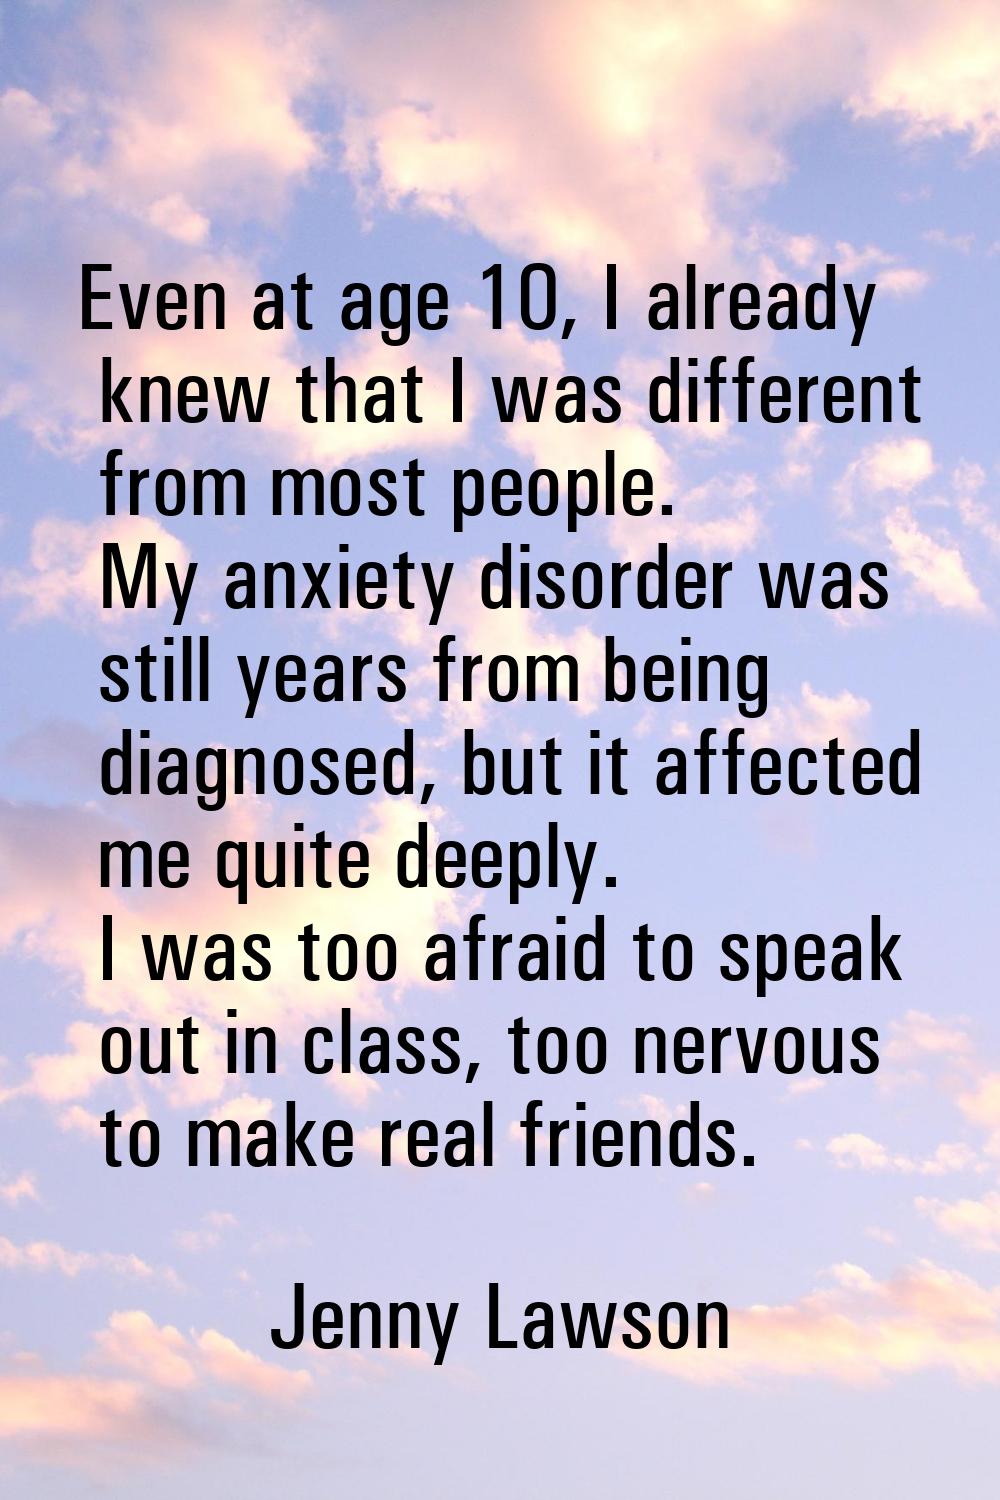 Even at age 10, I already knew that I was different from most people. My anxiety disorder was still